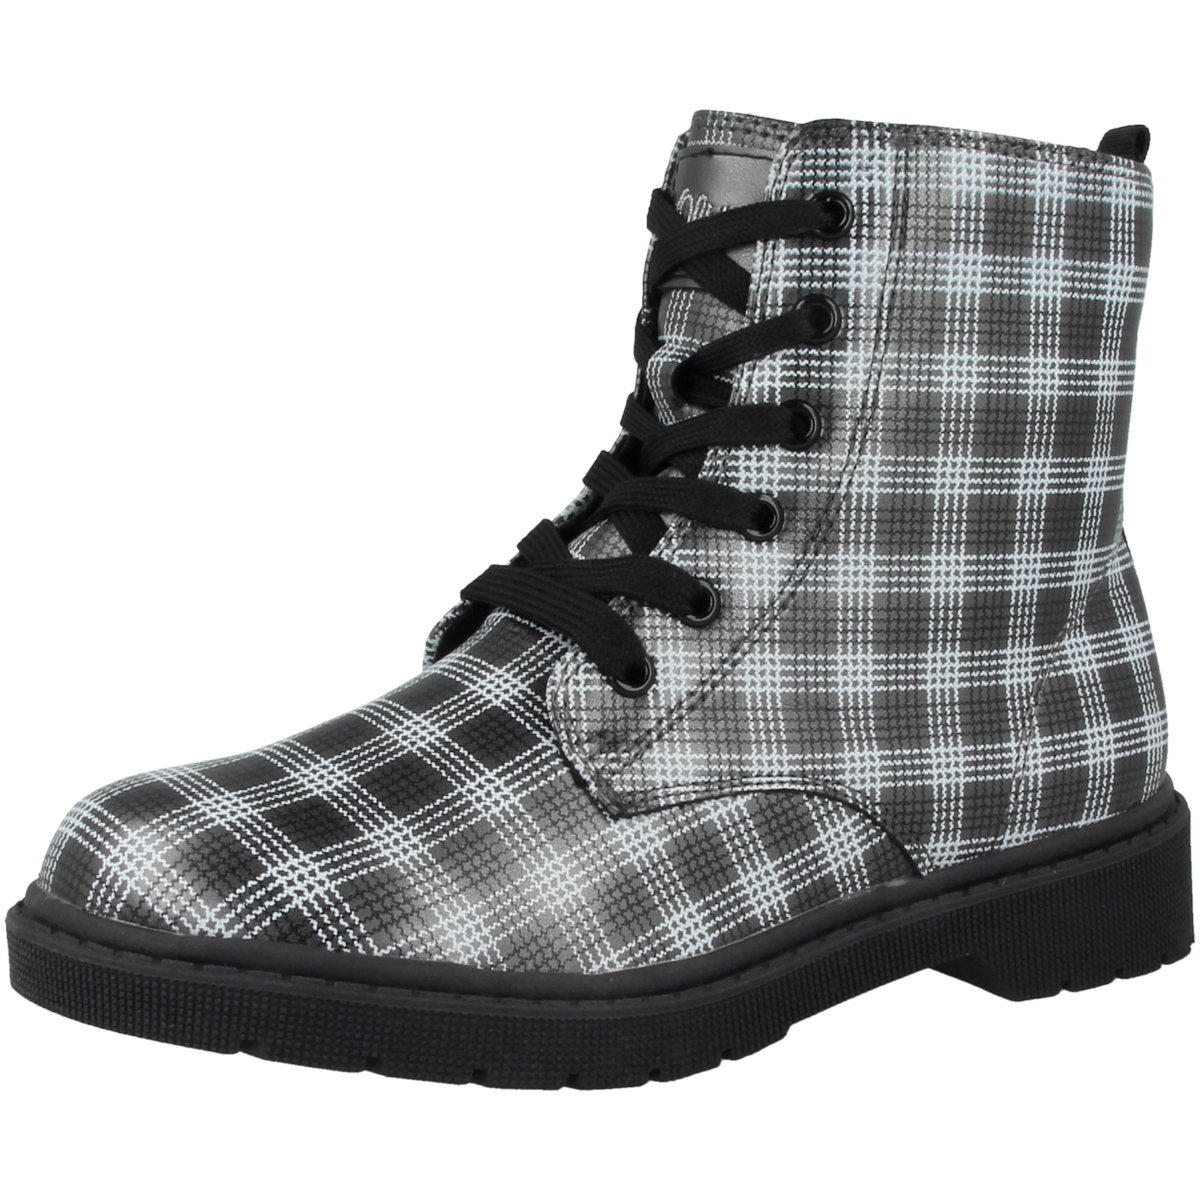 s.Oliver 5-45211-27 Boots grau